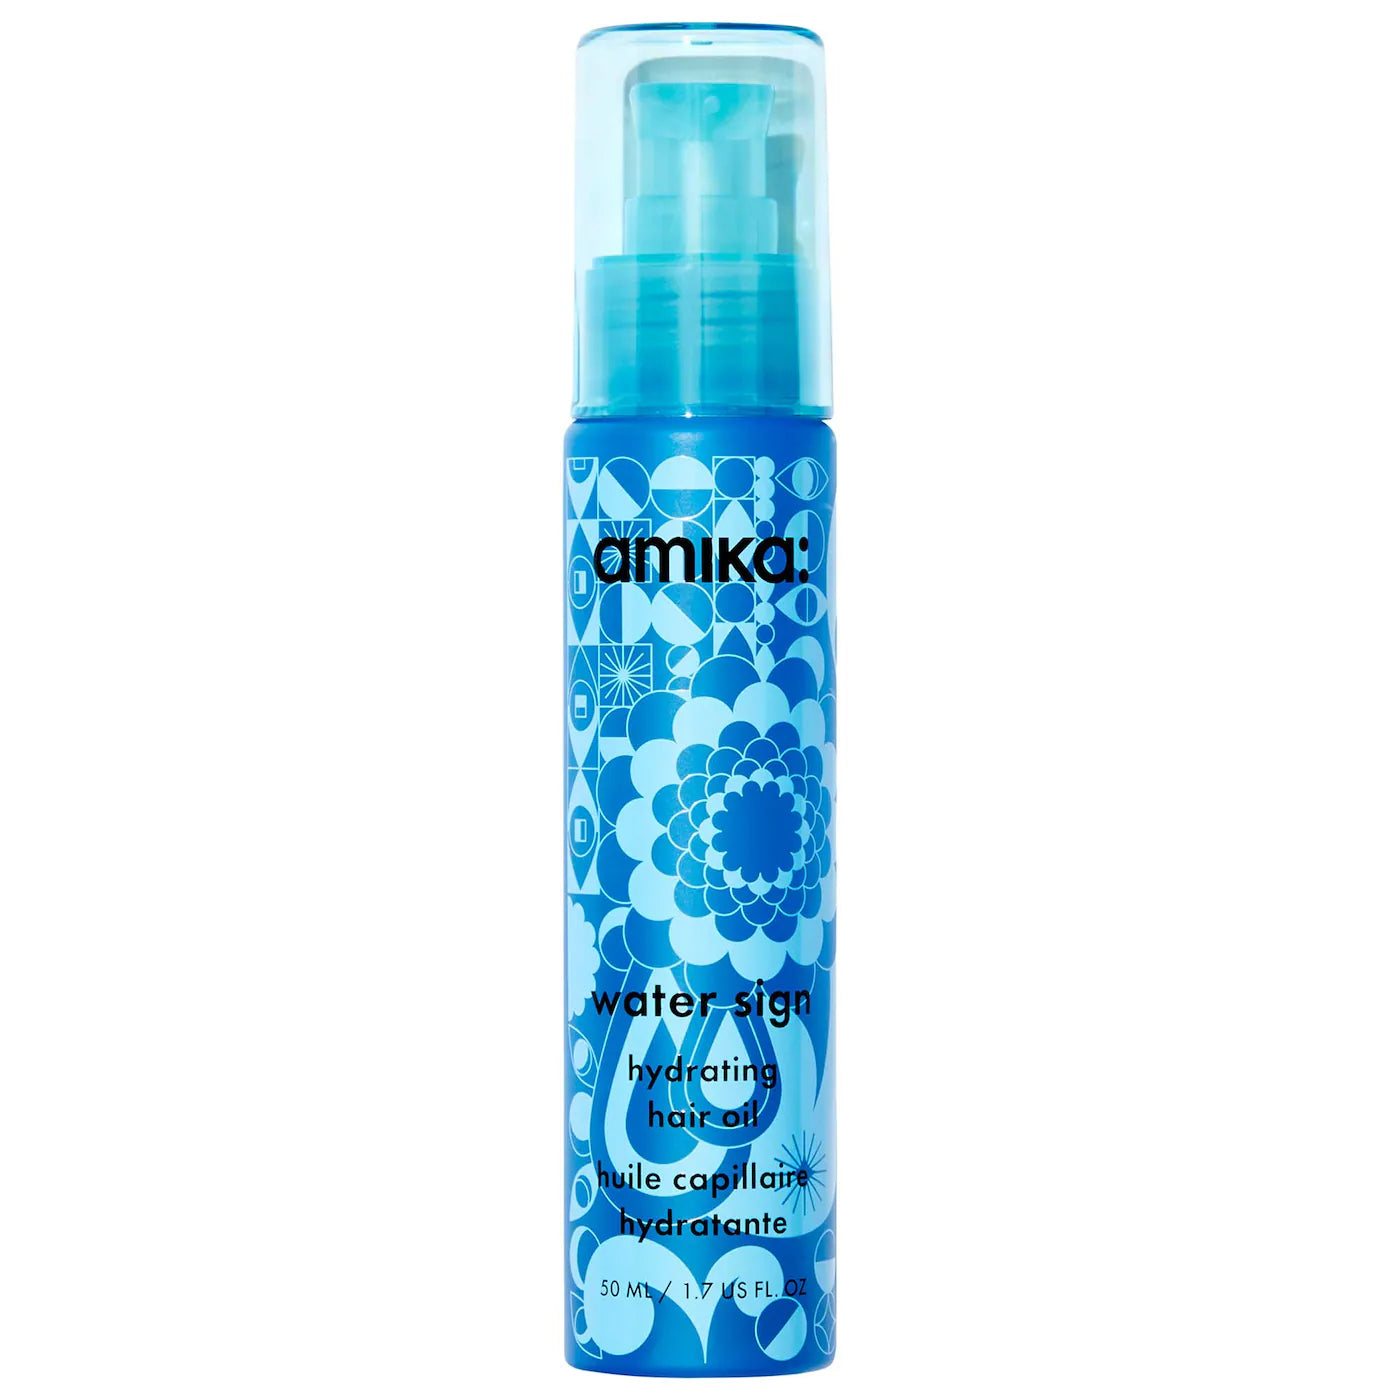 Amika Water Sign Hydrating Hair Oil with Hyaluronic Acid